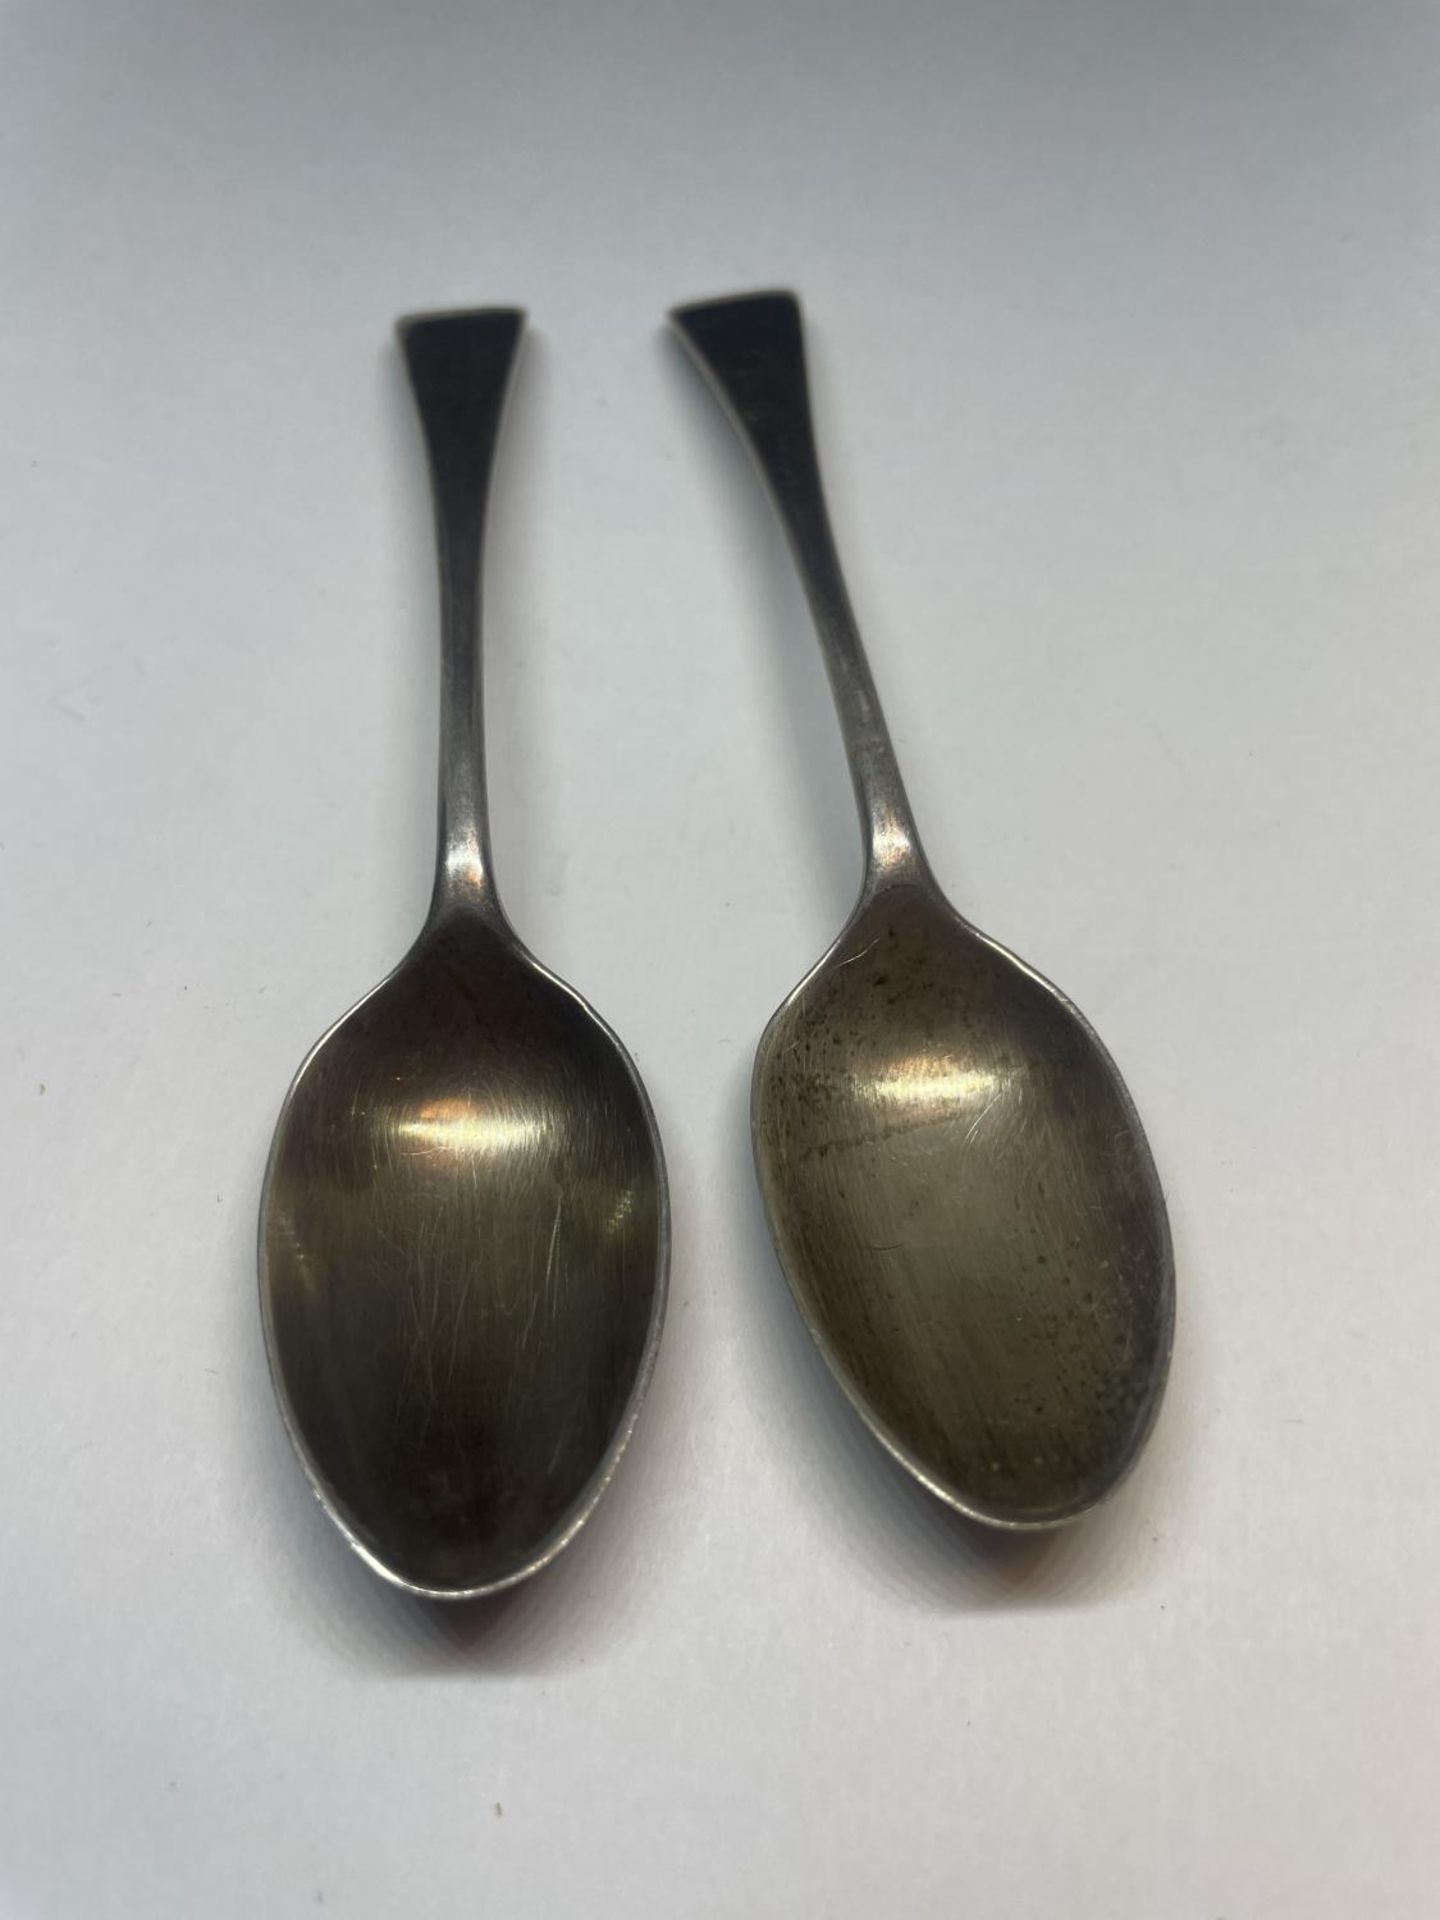 TWO HALLMARKED SHEFFIELD SILVER SPOONS GROSS WEIGHT 47.4 GRAMS